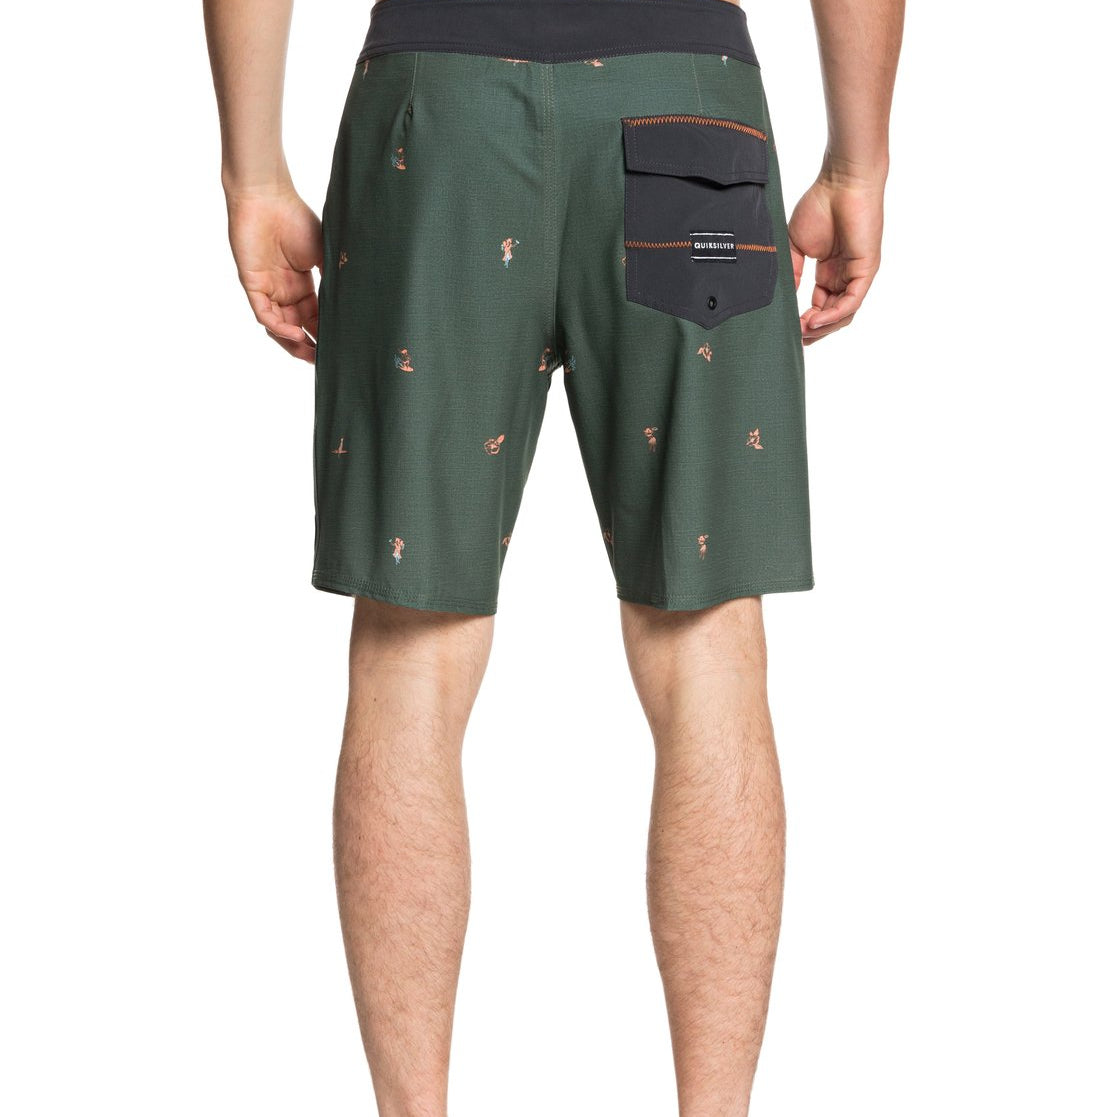 Quiksilver Highline Variable 19" Boardshorts CQY6-Green 28